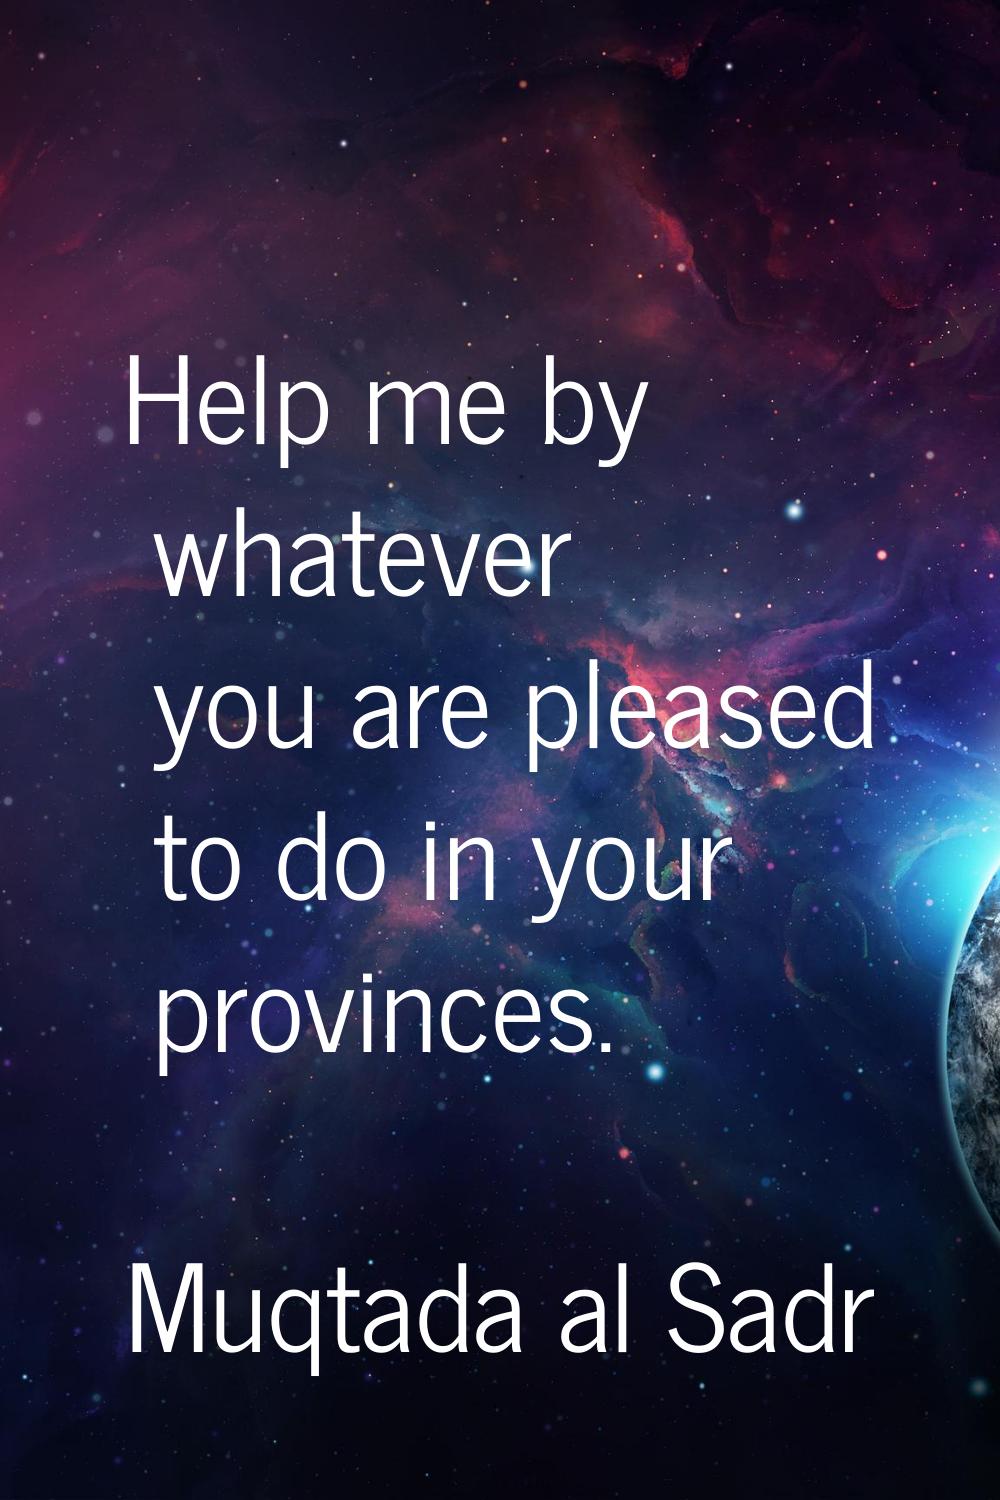 Help me by whatever you are pleased to do in your provinces.